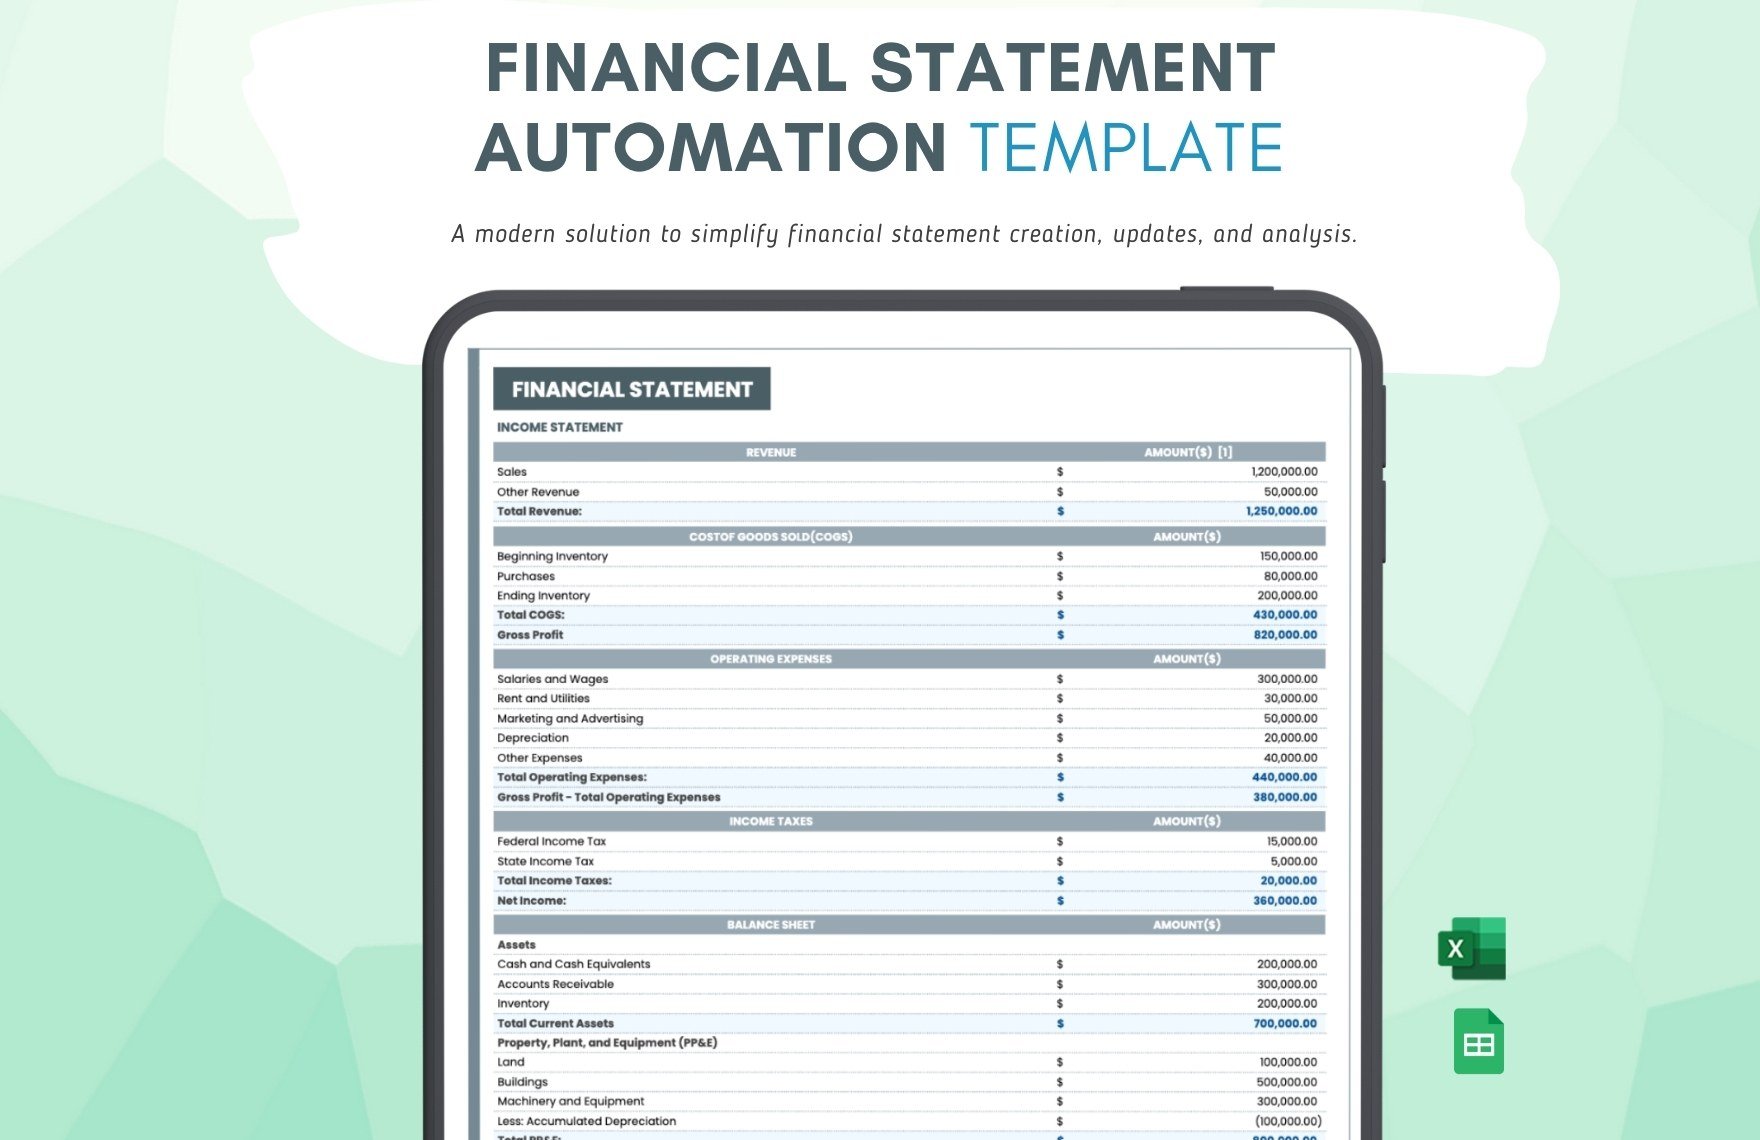 Financial Statement Automation Template in Excel, Google Sheets